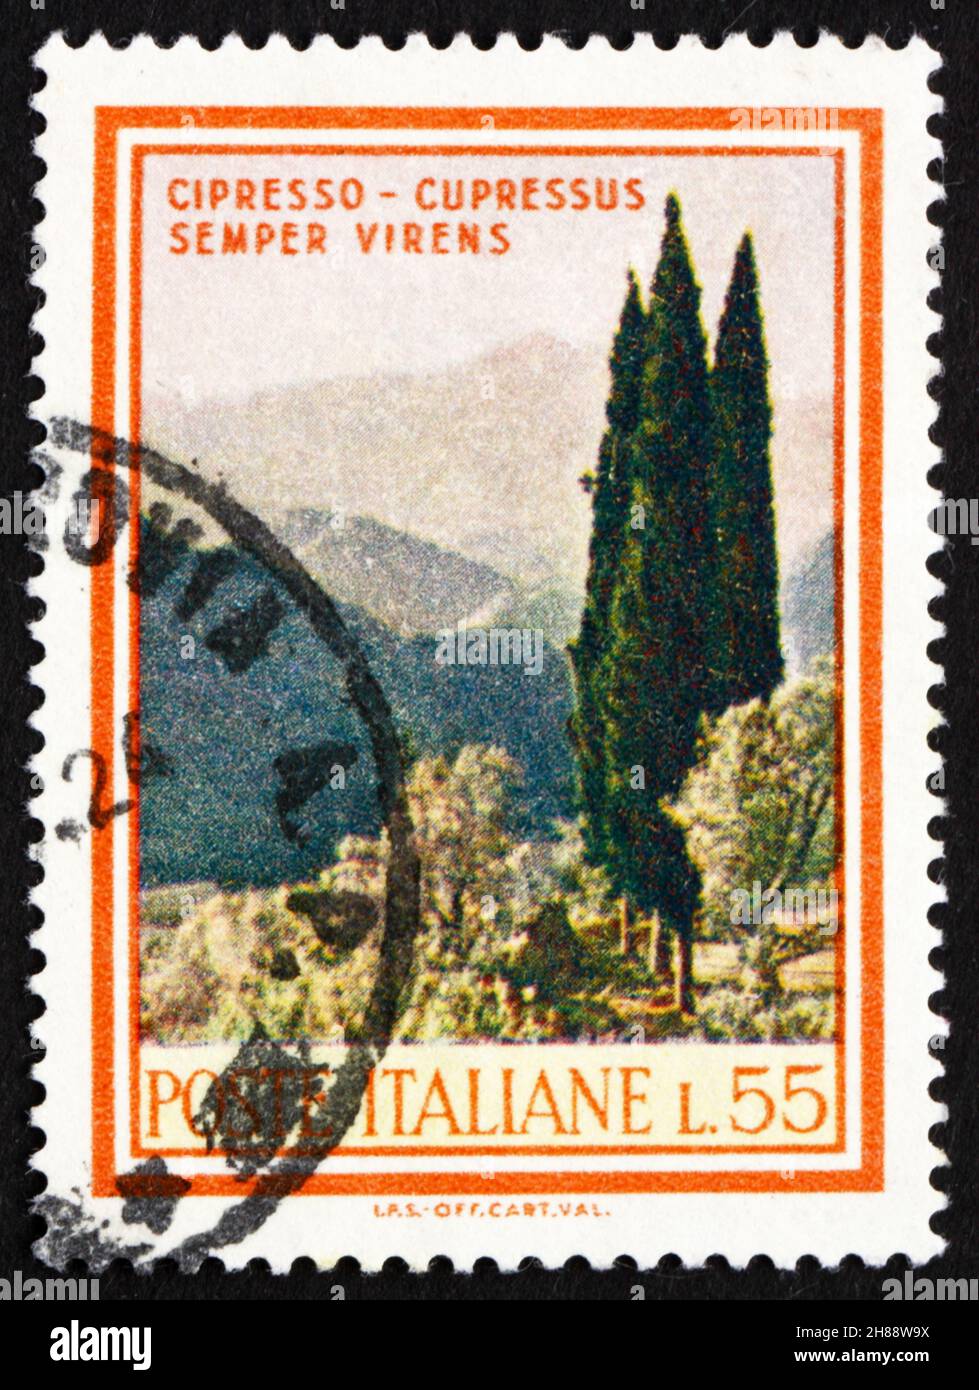 ITALY - CIRCA 1966: a stamp printed in the Italy shows Cypresses, Cupressus Sempervirens, circa 1966 Stock Photo